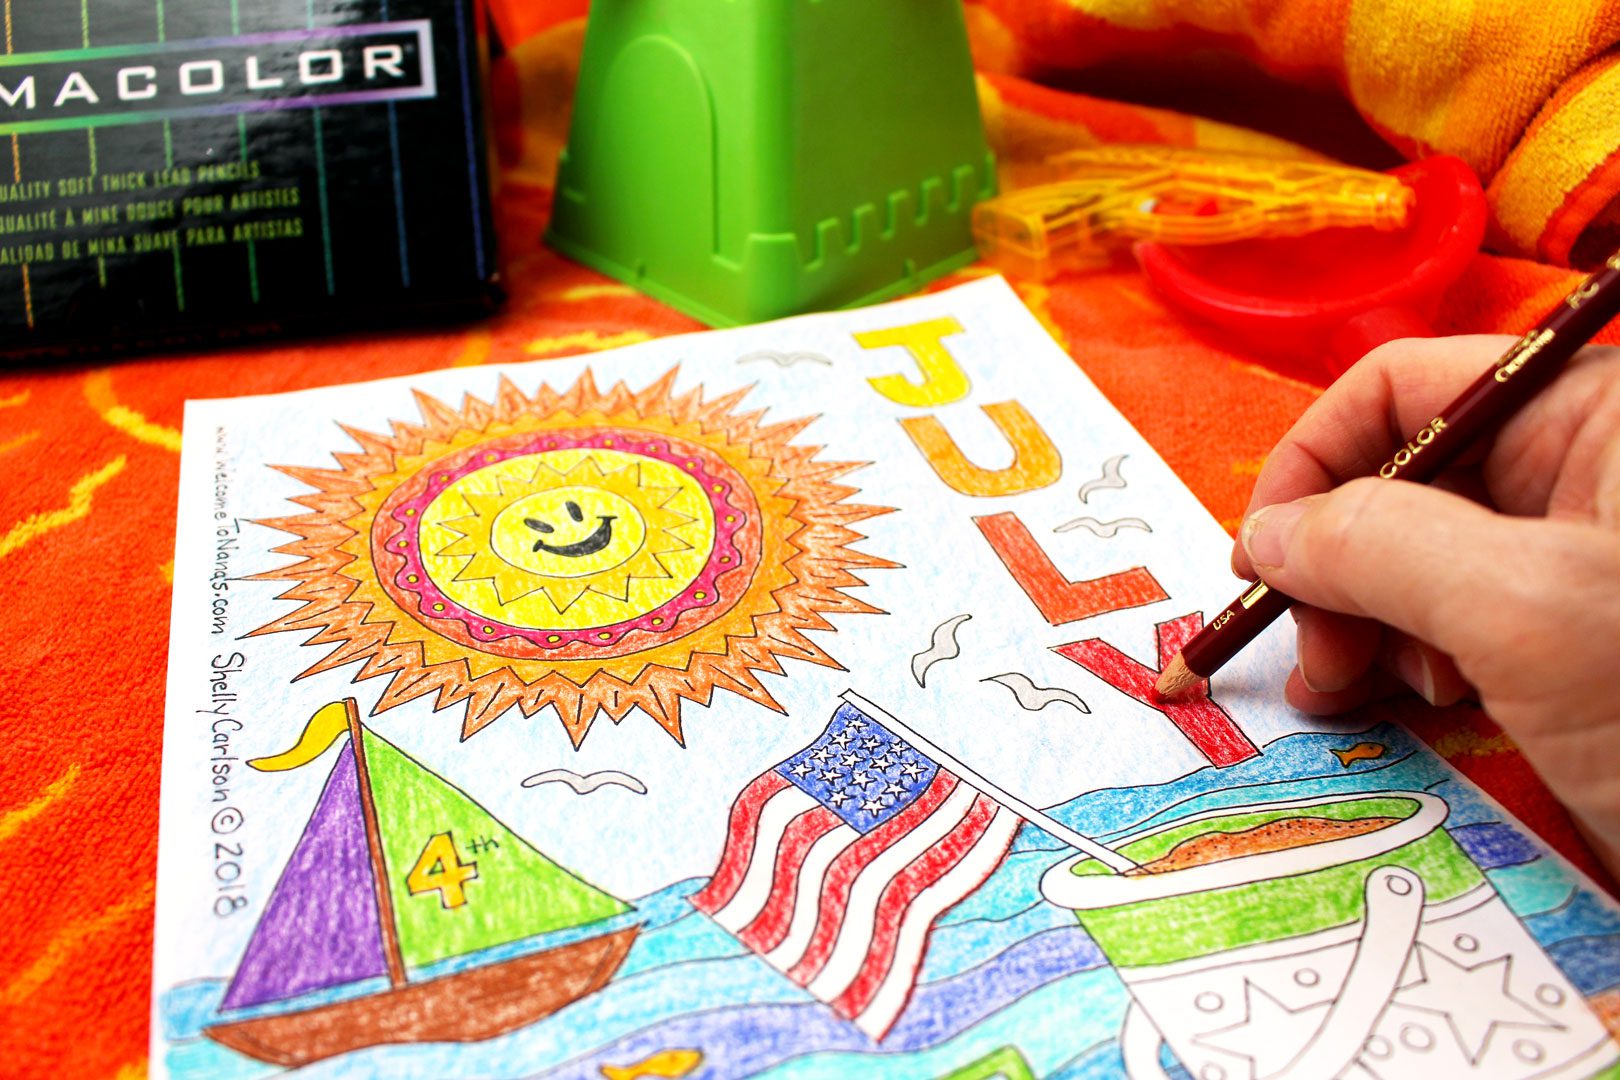 Coloring a July coloring page on beach towel on the sand with colored pencils near by.